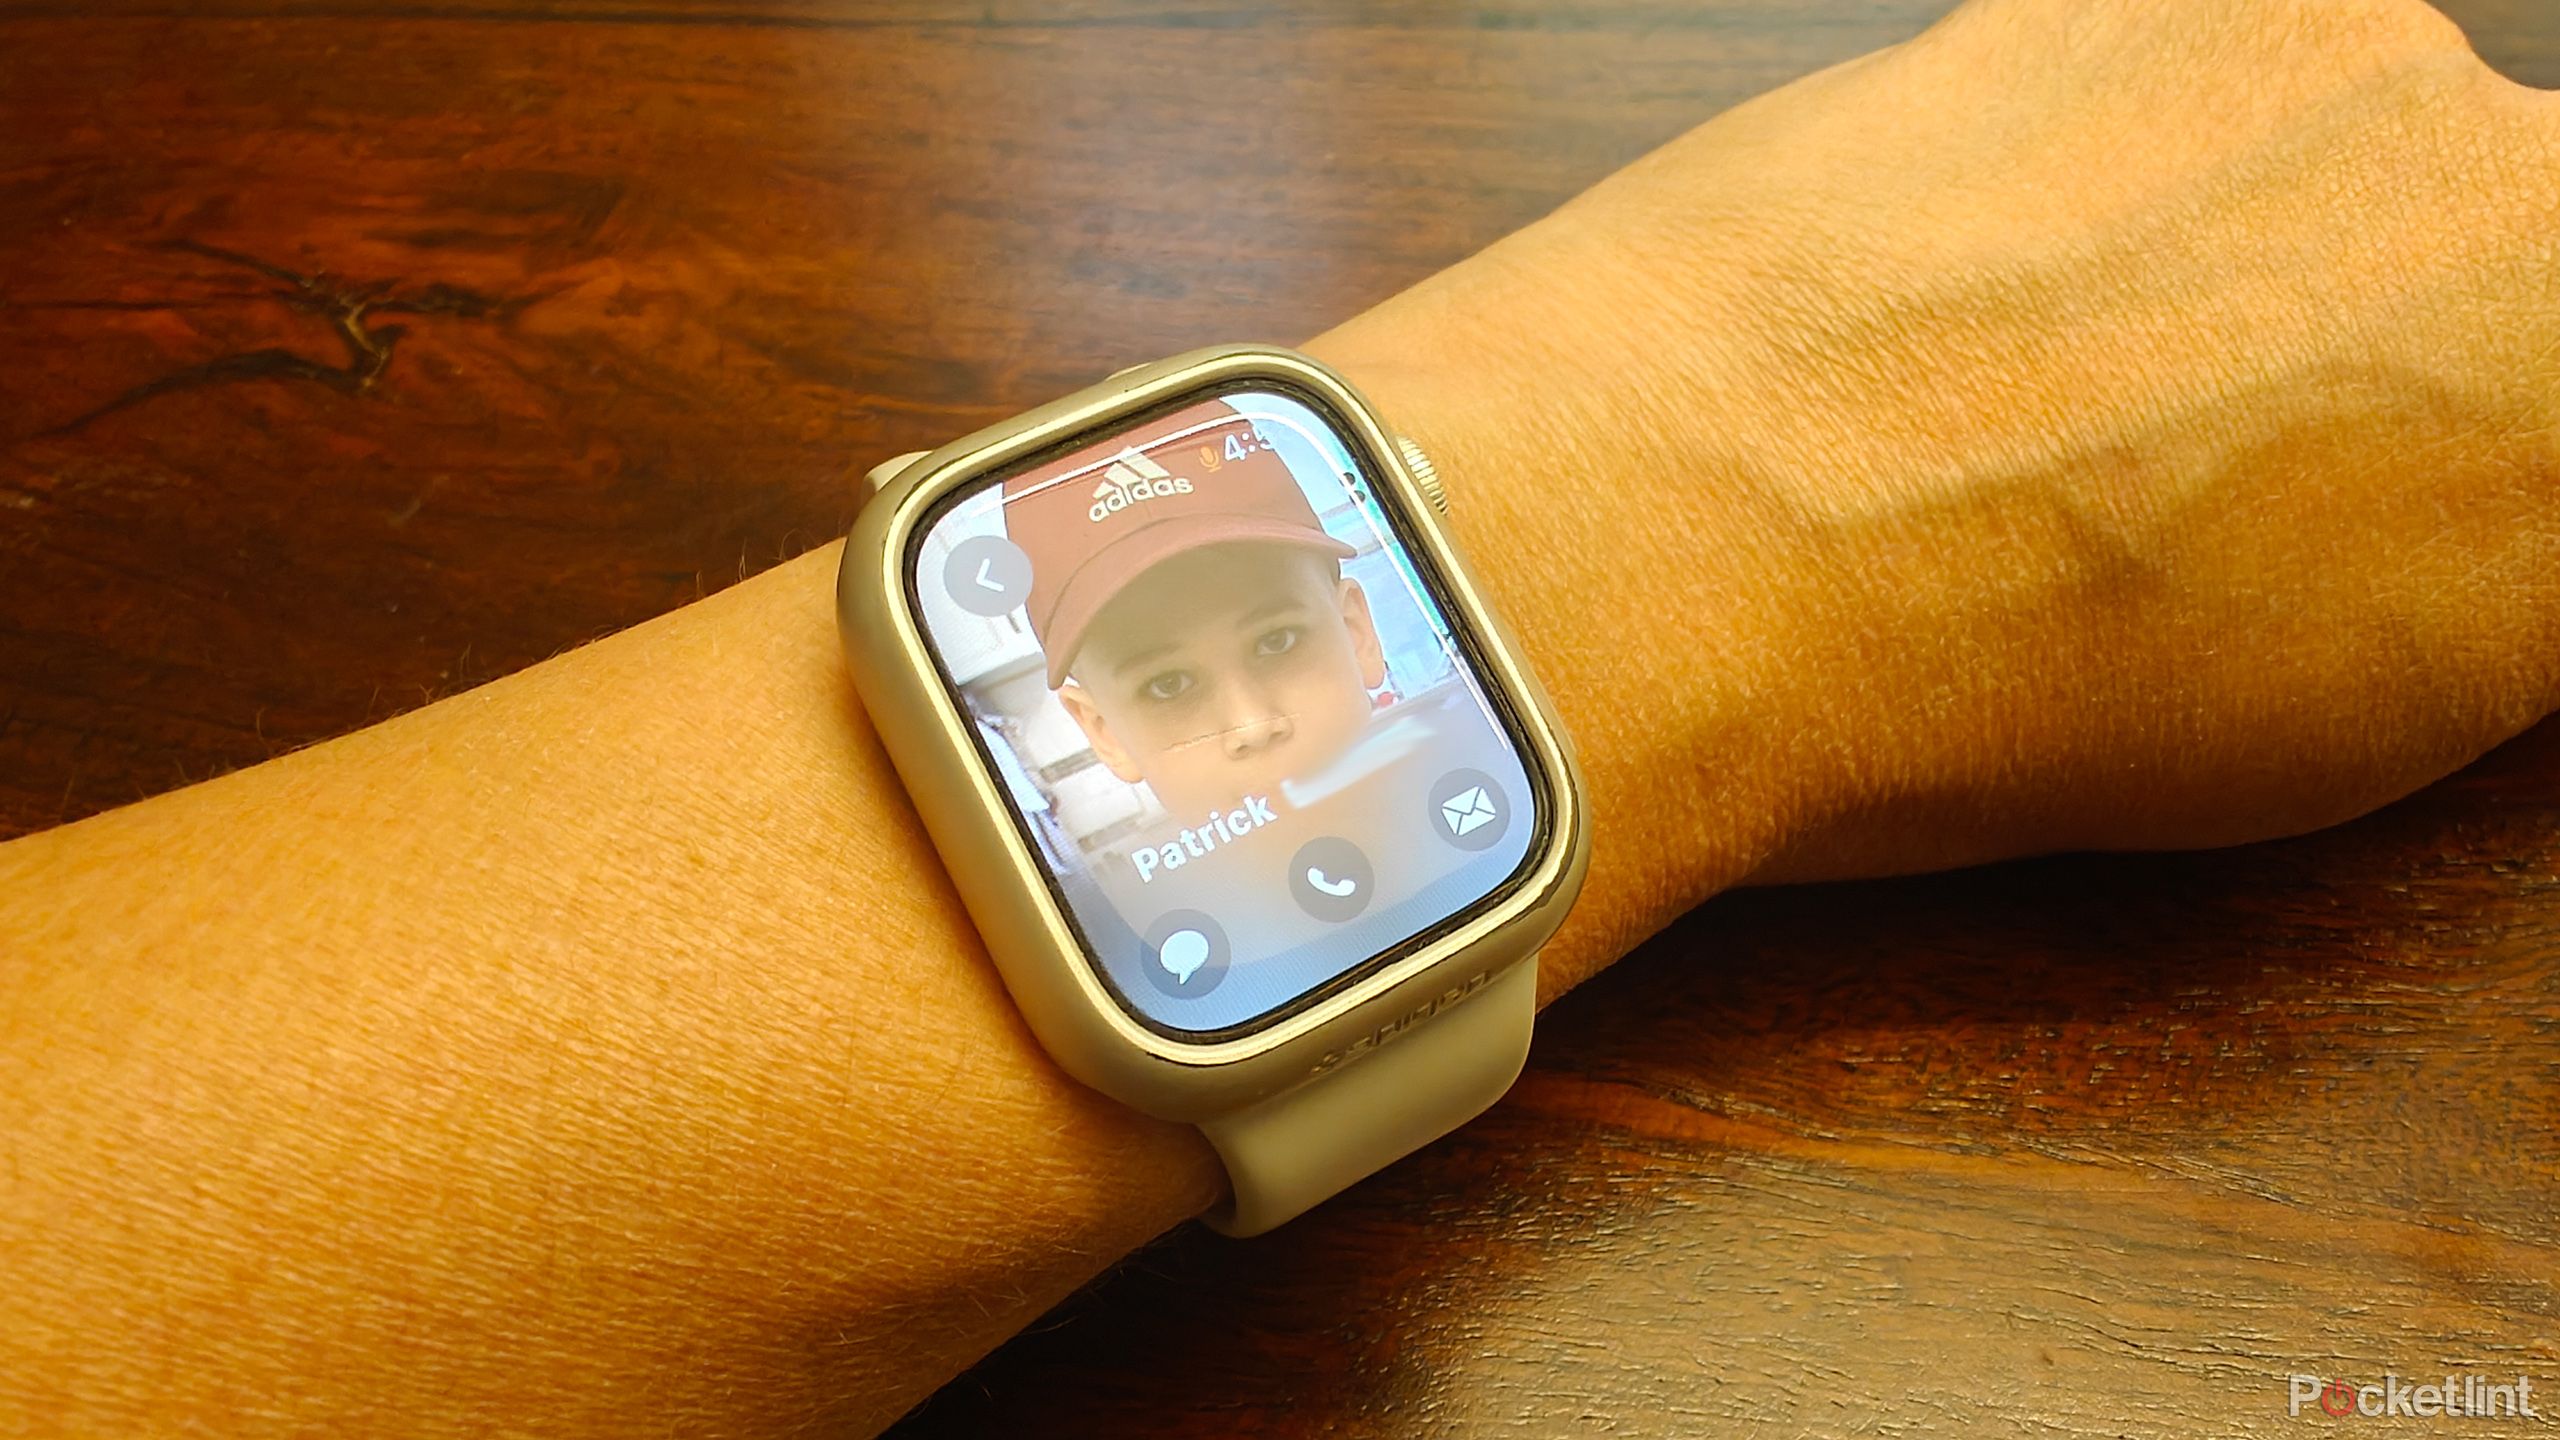 Apple Watch FaceTime phone call in progress